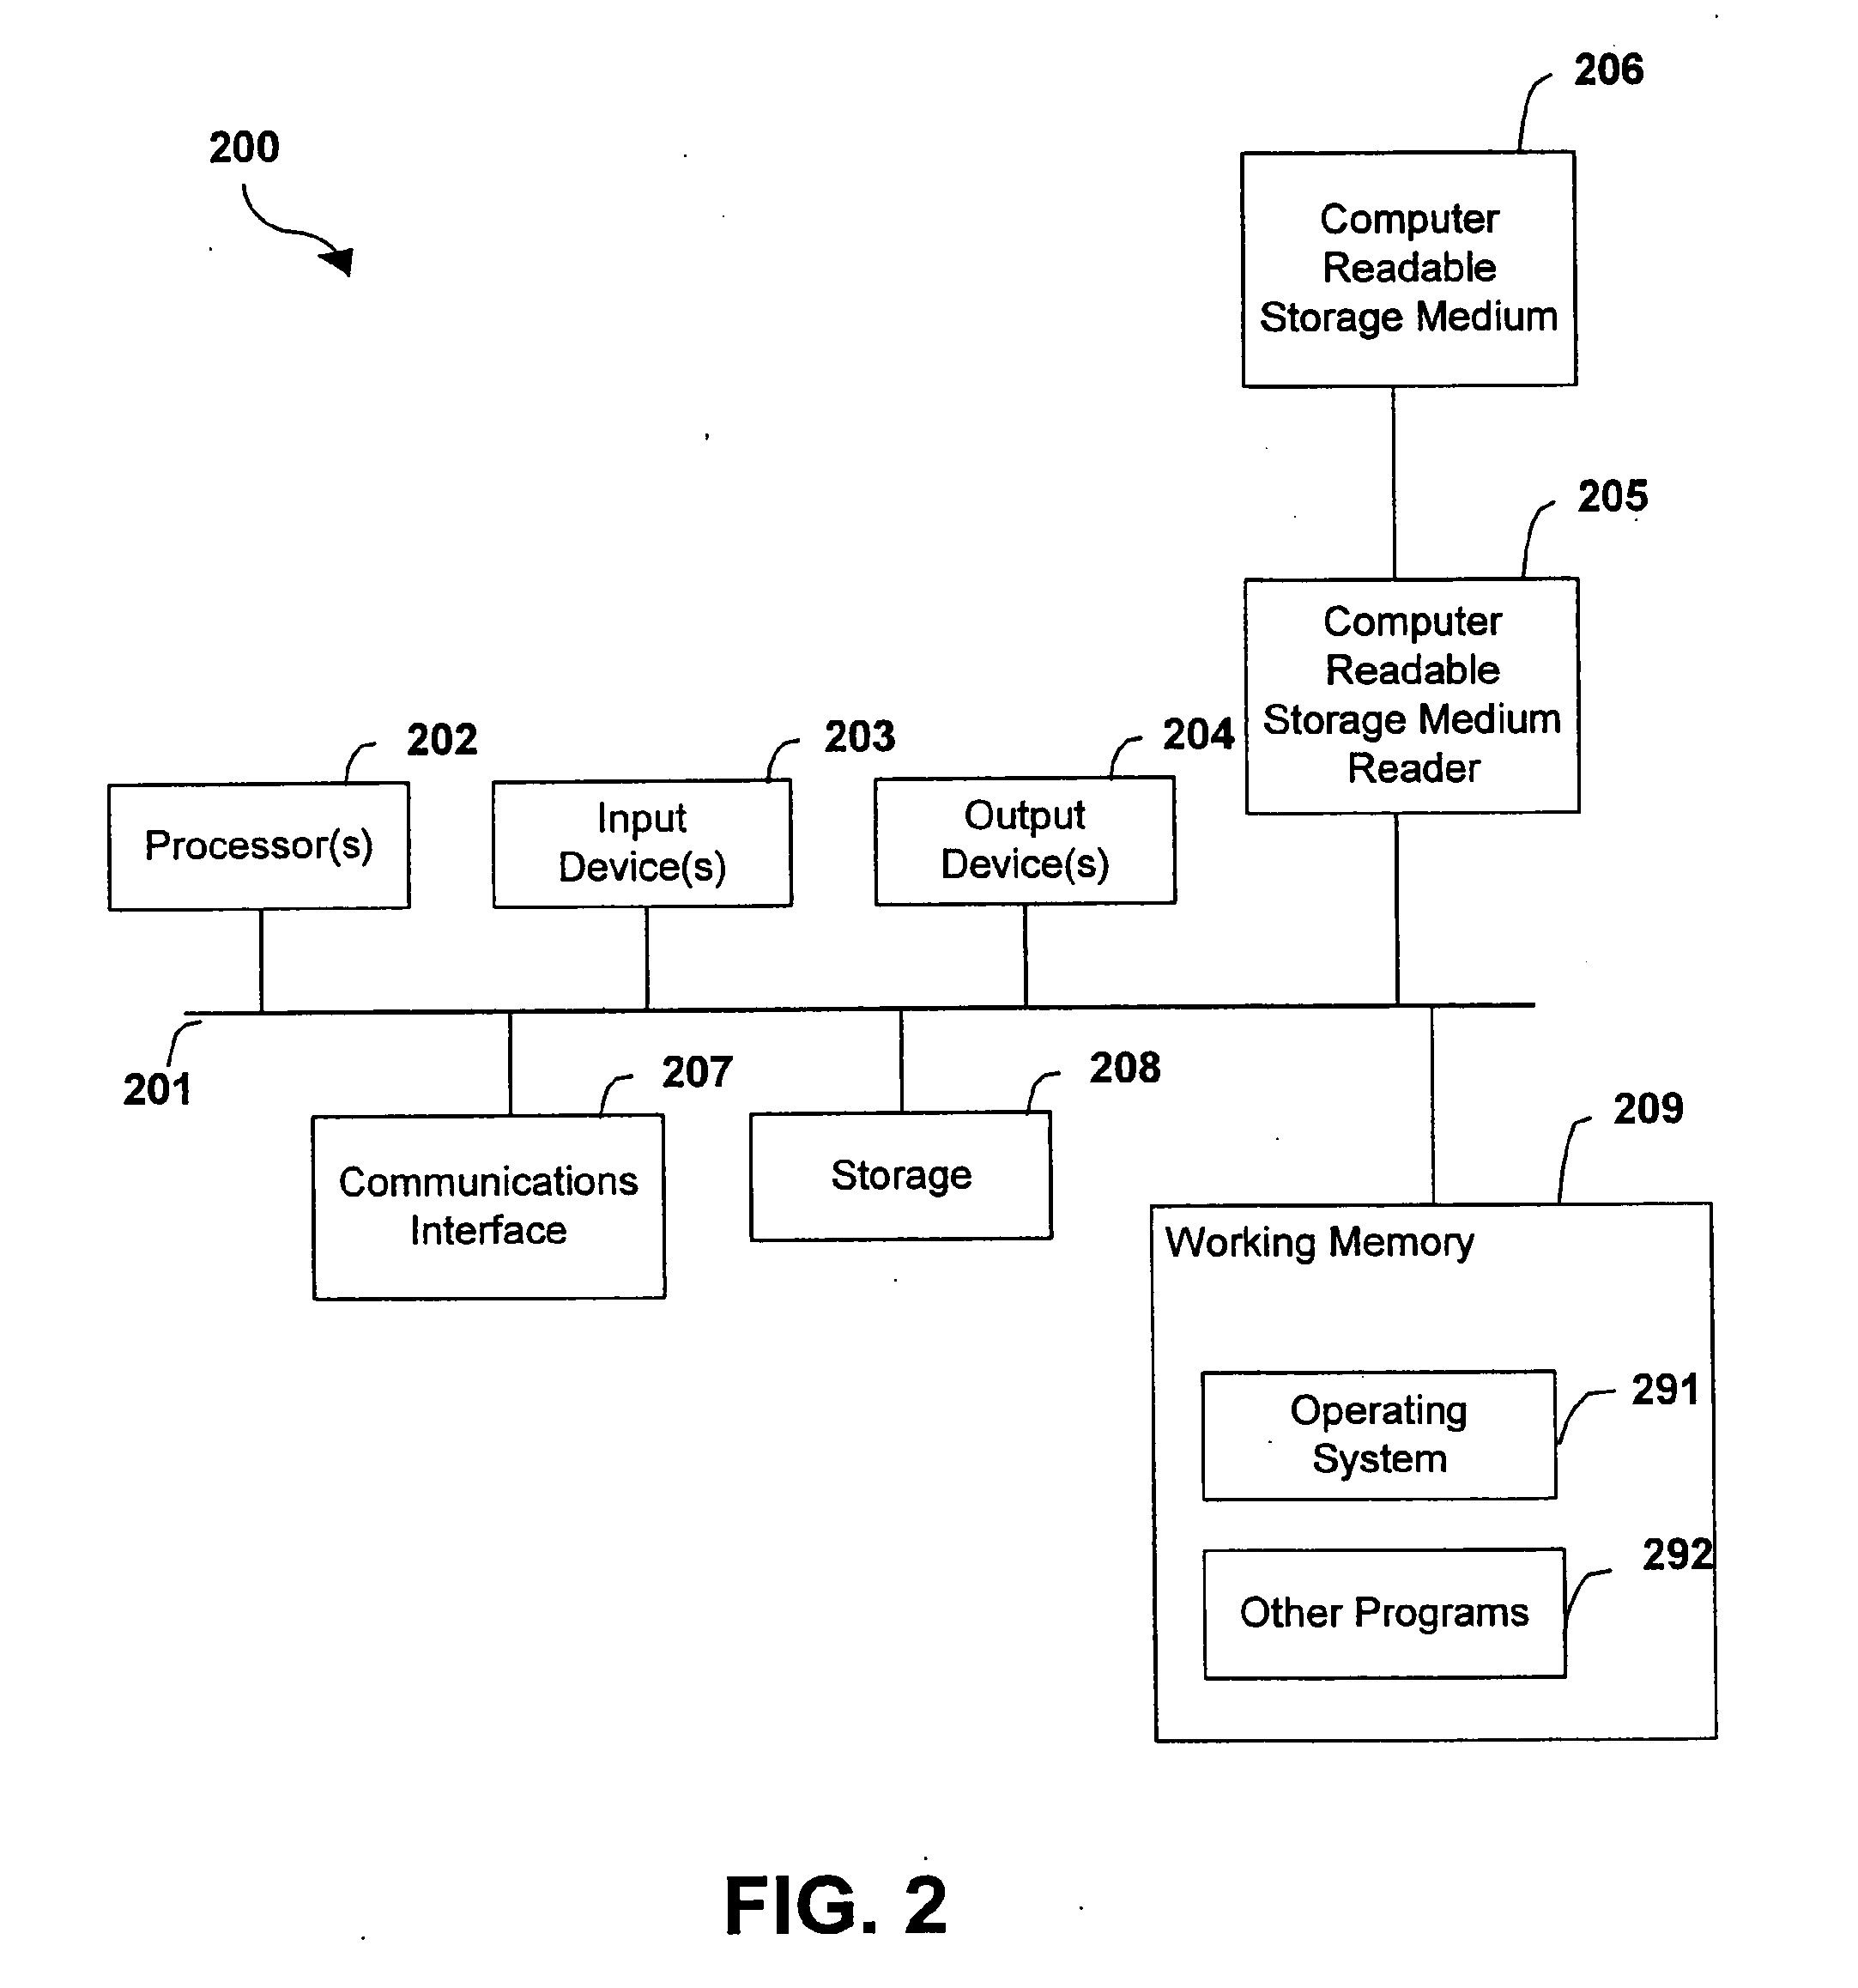 System and method for preventing access to data on a compromised remote device